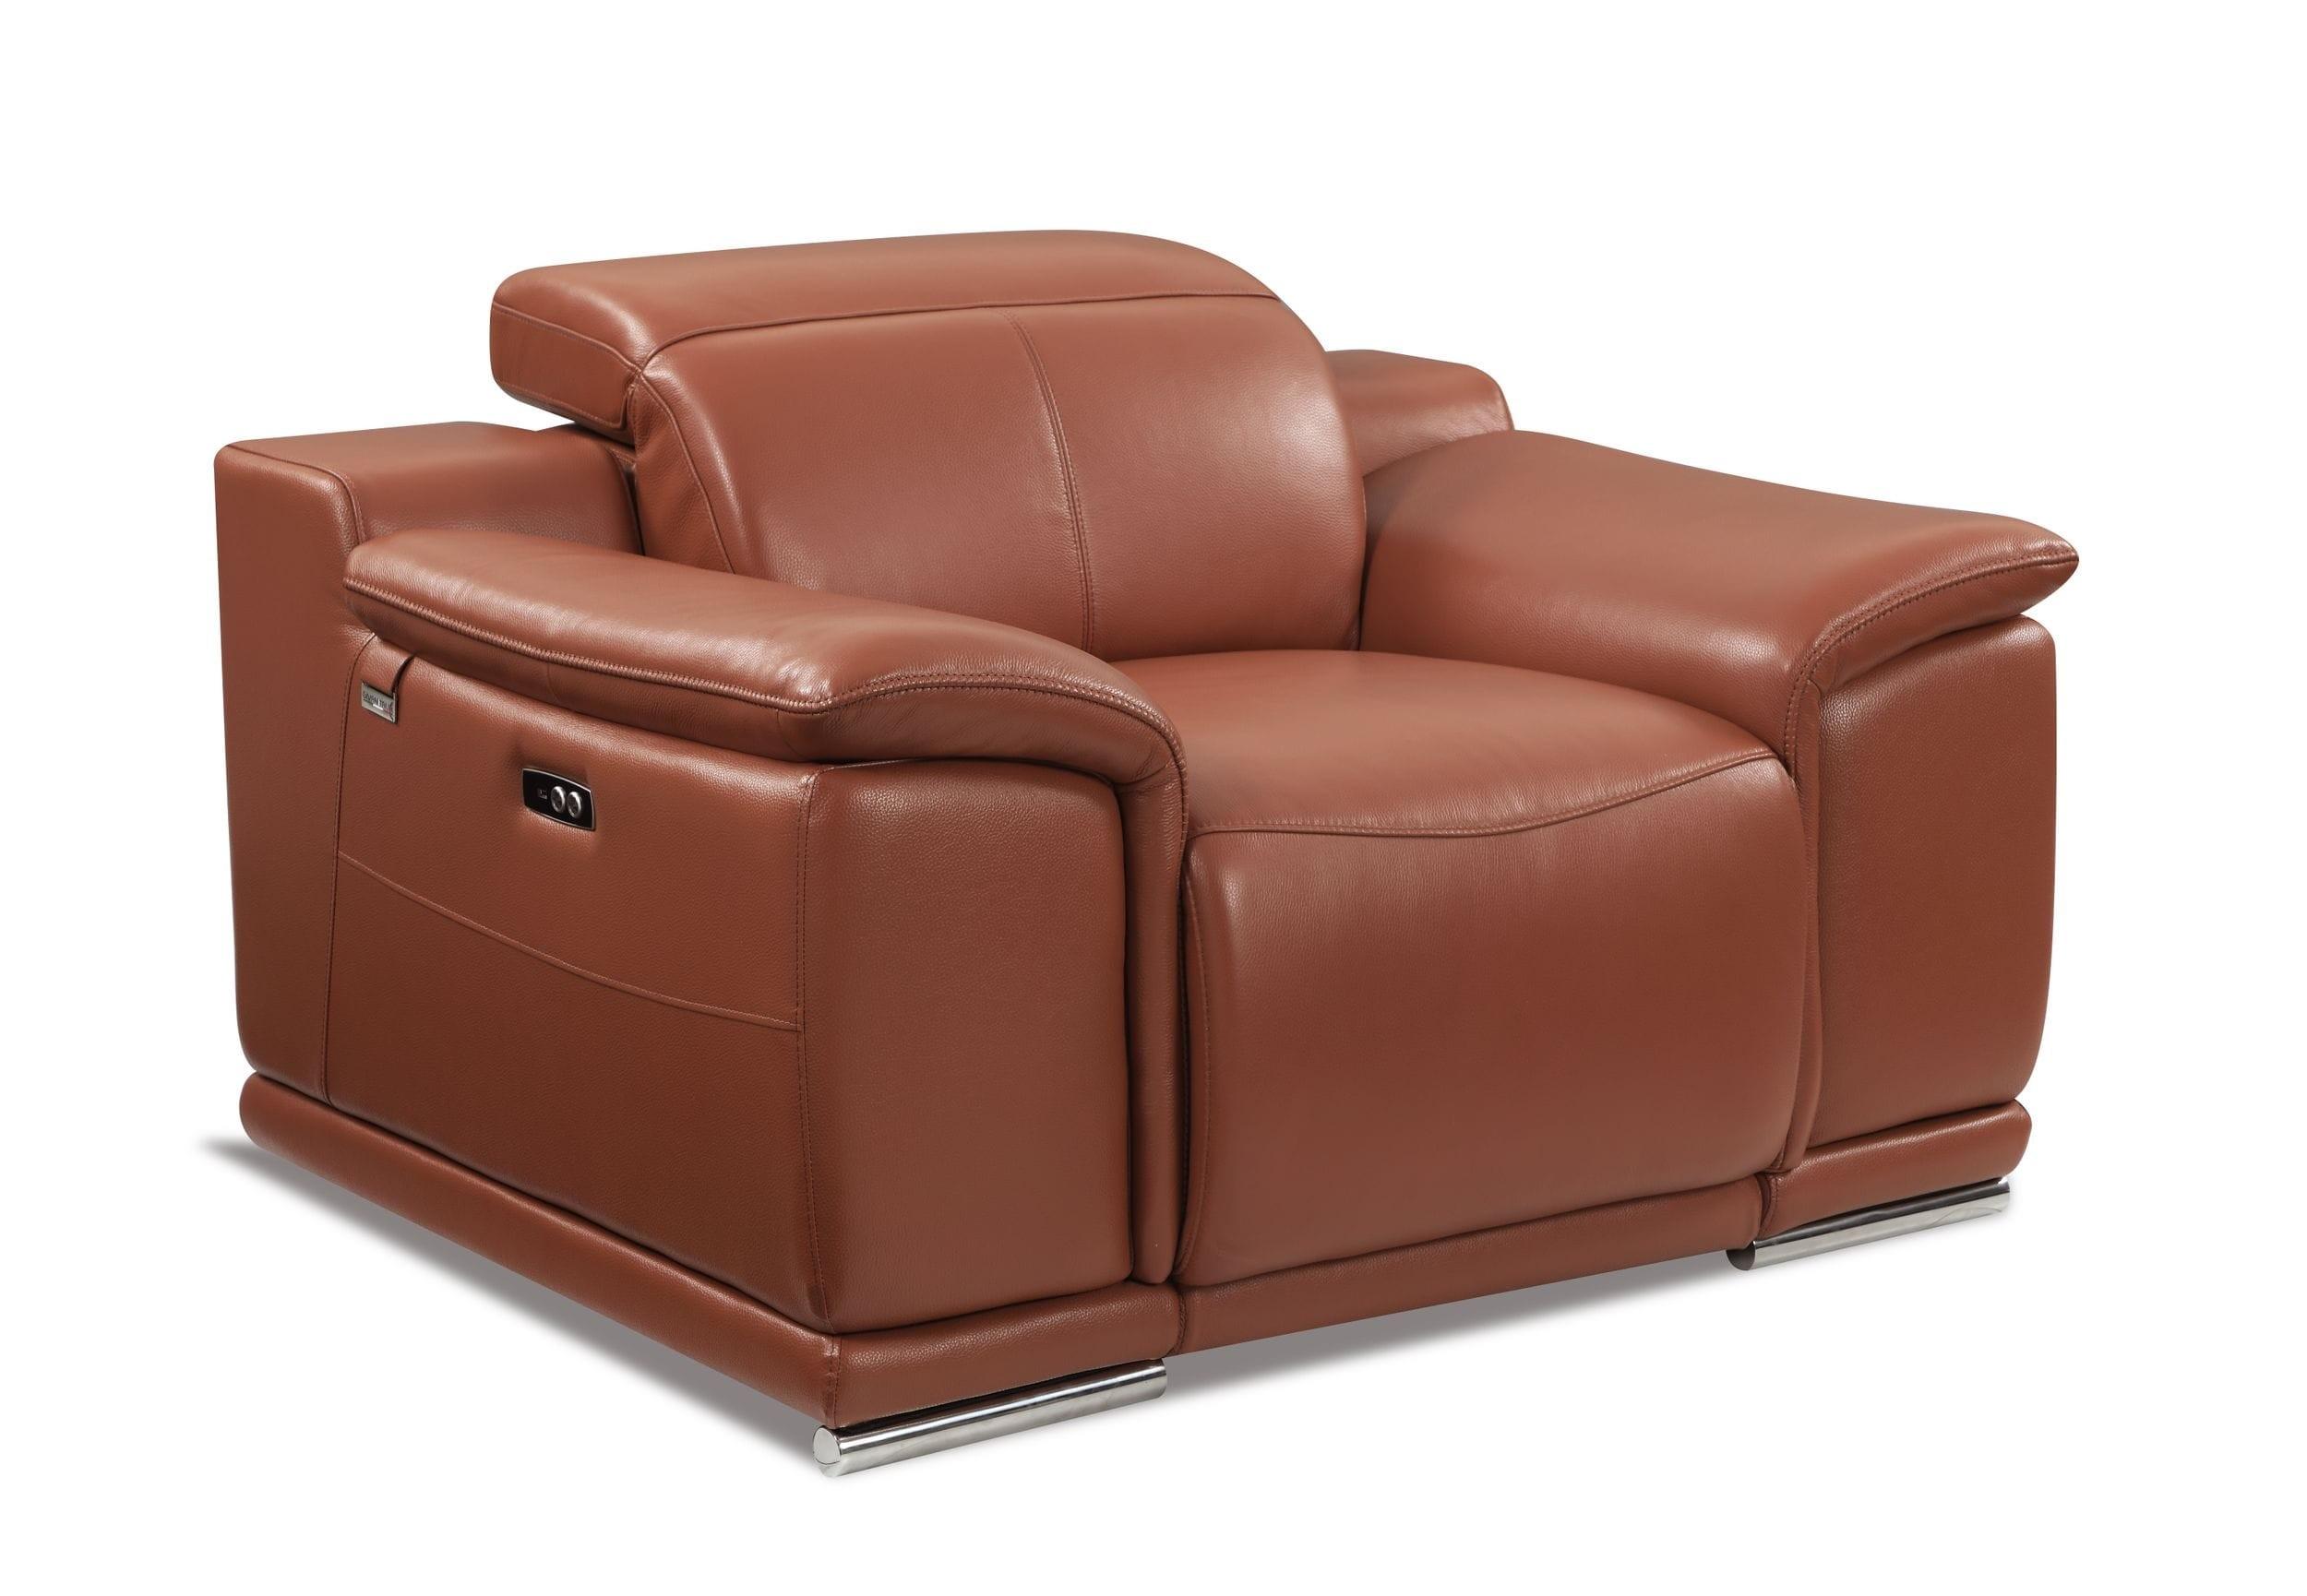 Contemporary Reclining Chair 9762 9762-CAMEL-CH in Camel Leather Match